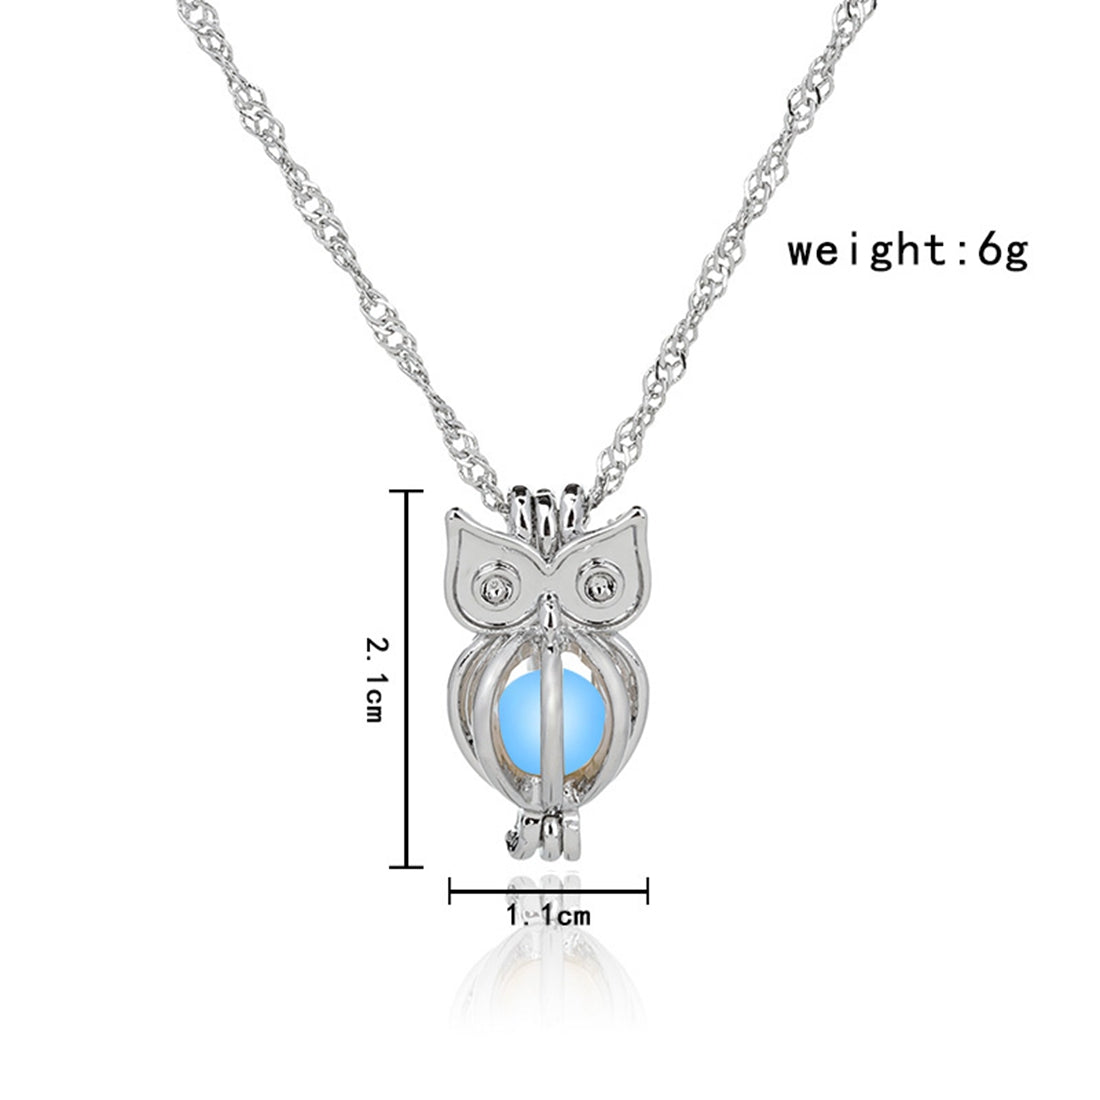 Charm Glowing Owl Pendant Necklace Cute Luminous Jewelry Choker 3 Colors Christmas Gift For Women Necklace Fashion